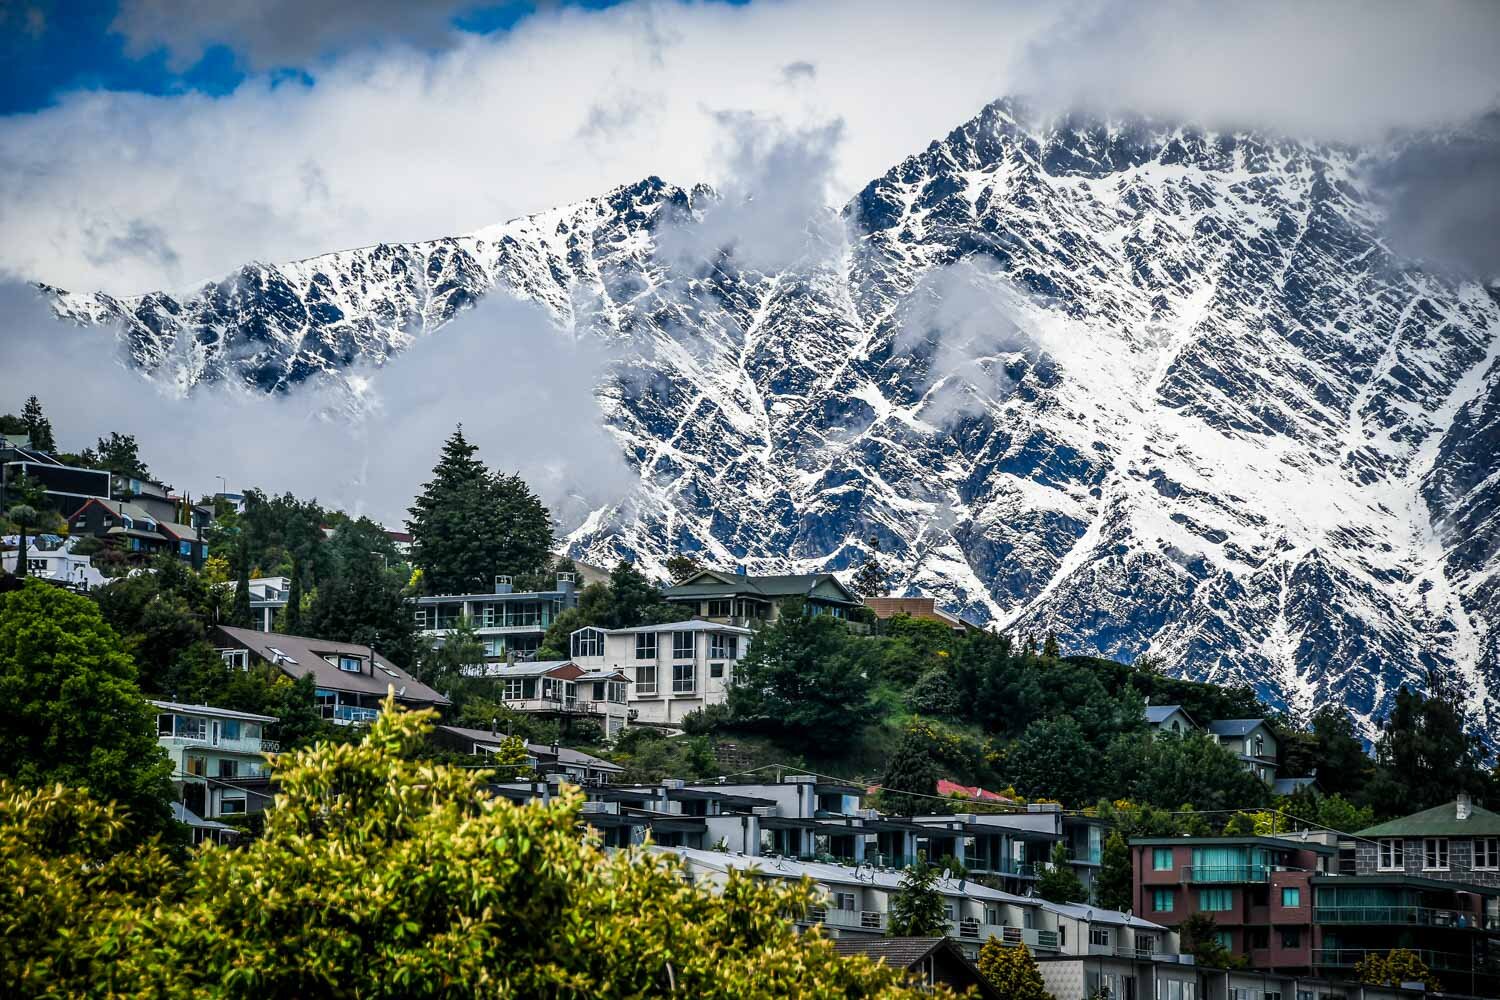 Where to stay in Queenstown